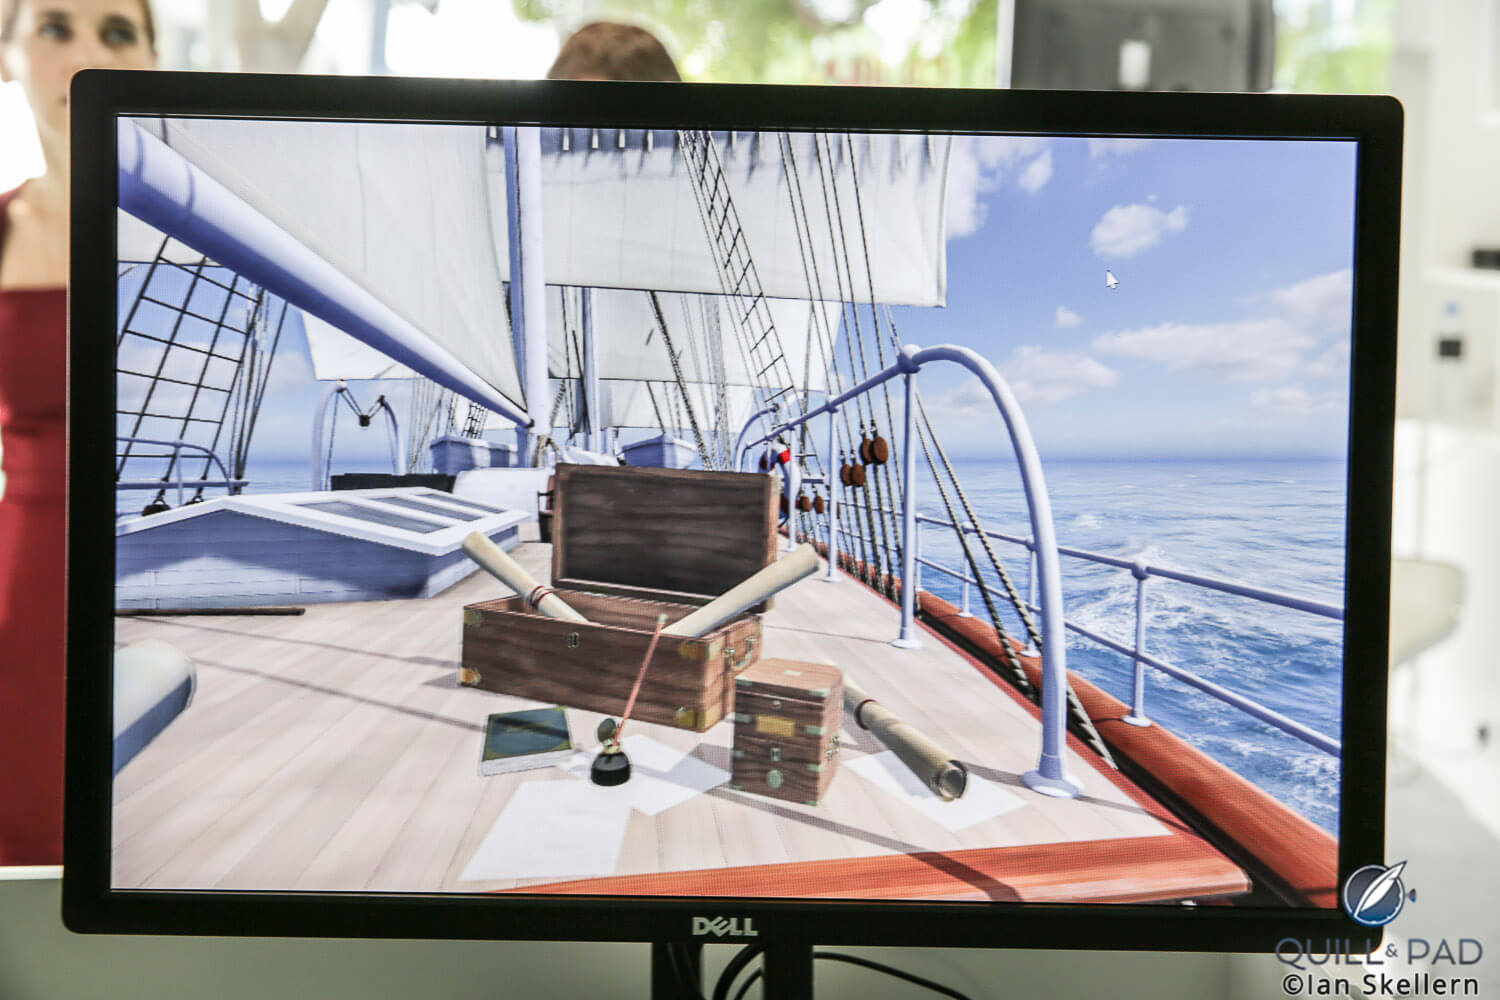 Using a sextant to navigate a sailing ship was one of 3 of the virtual experiences the FHH offered at Dubai Watch Week 2017